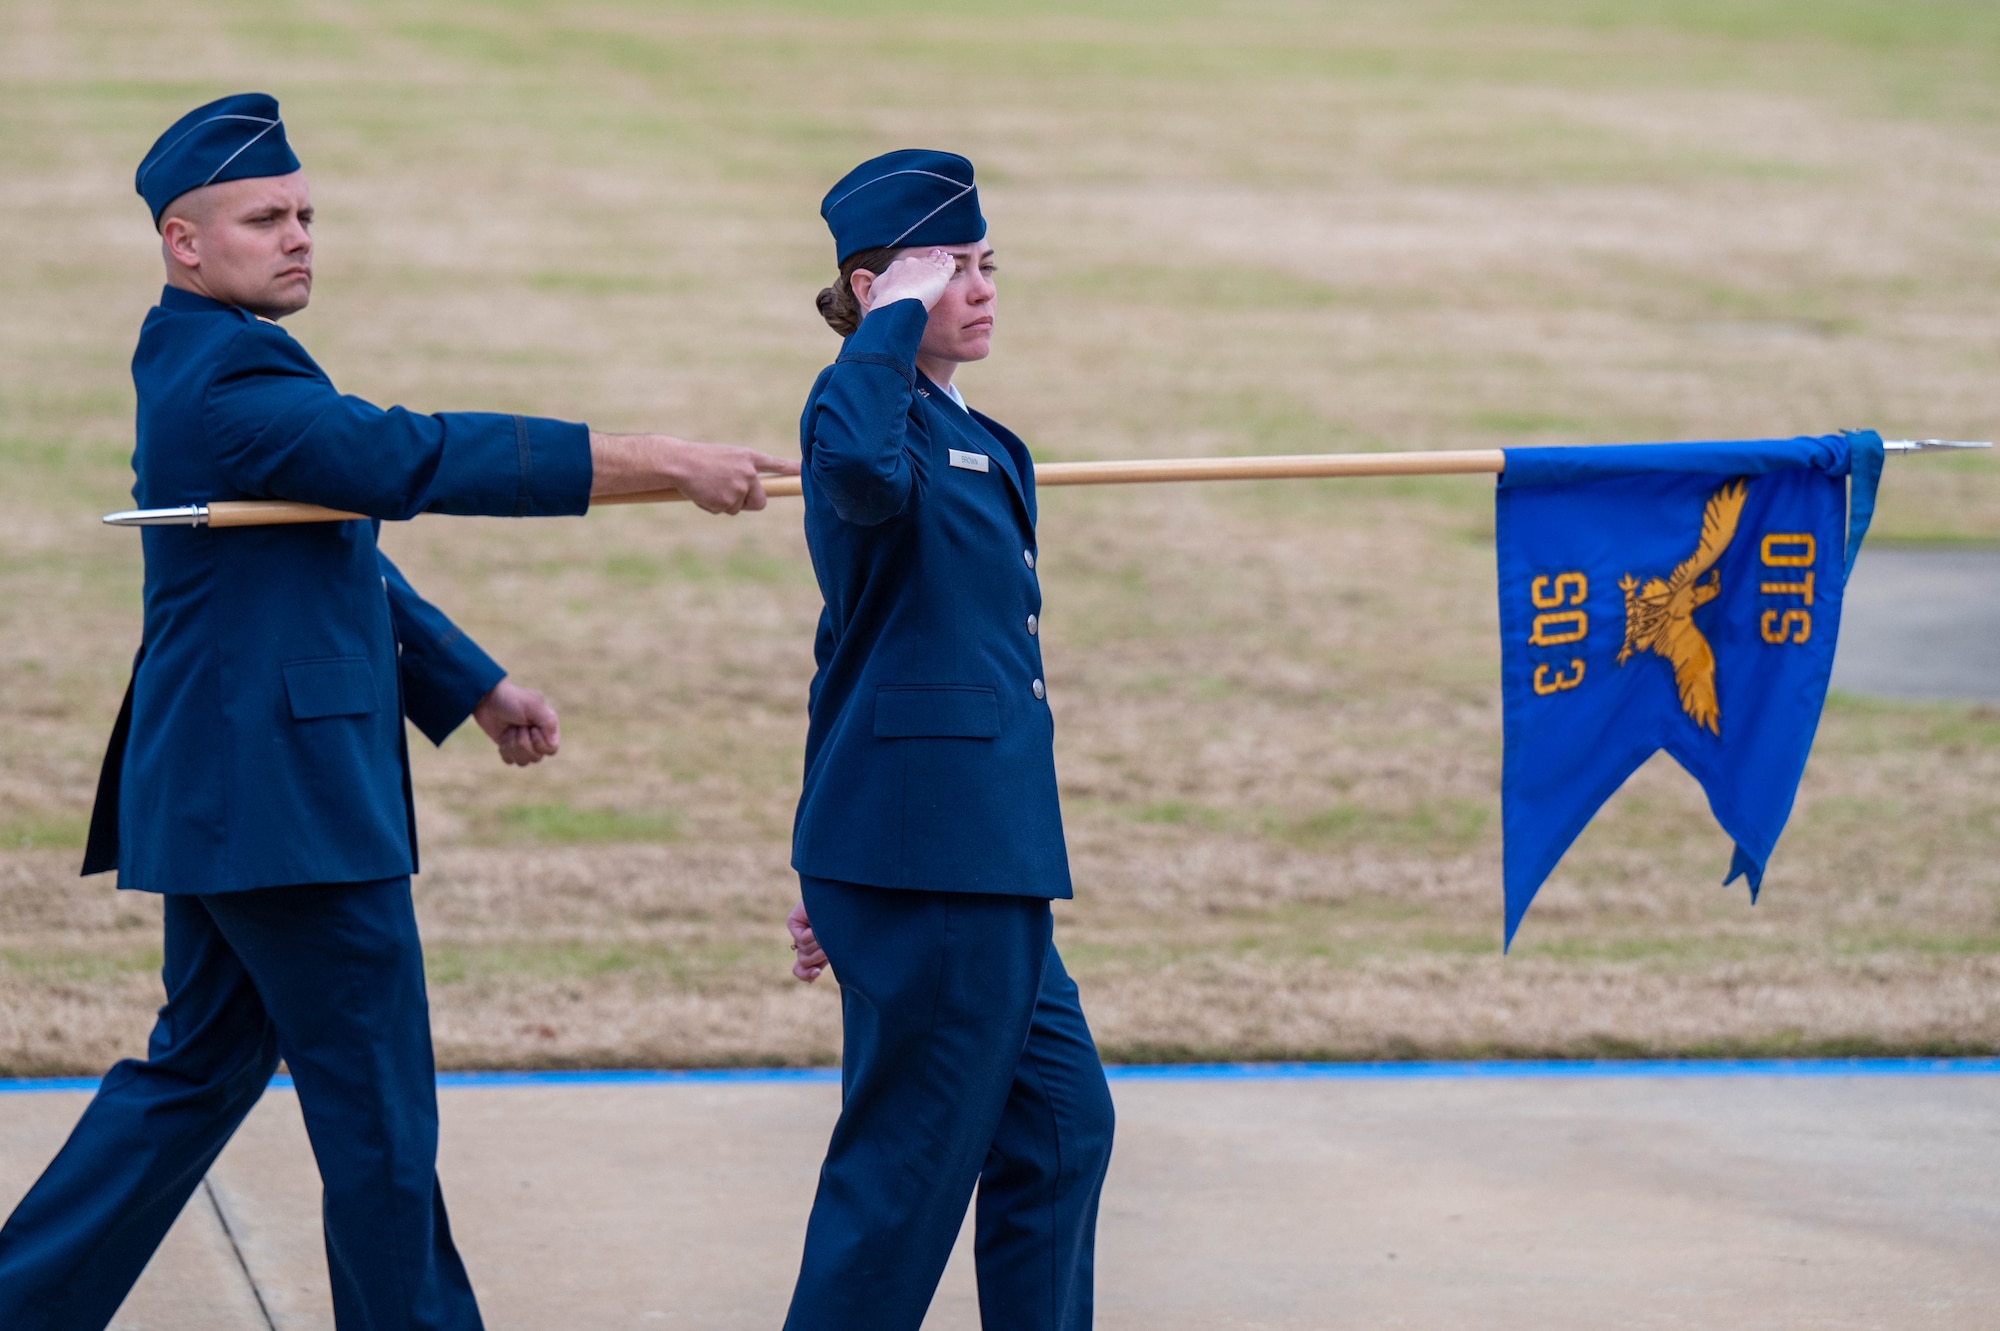 U.S. Air Force lieutenants march by for pass and review at Officer Training School, December 8, 2023, at Welch Field, Maxwell Air Force Base, Alabama. The officers comprised the first all-Space Force flight to commission from OTS. (U.S. Air Force photo by Airman Tyrique Barquet)